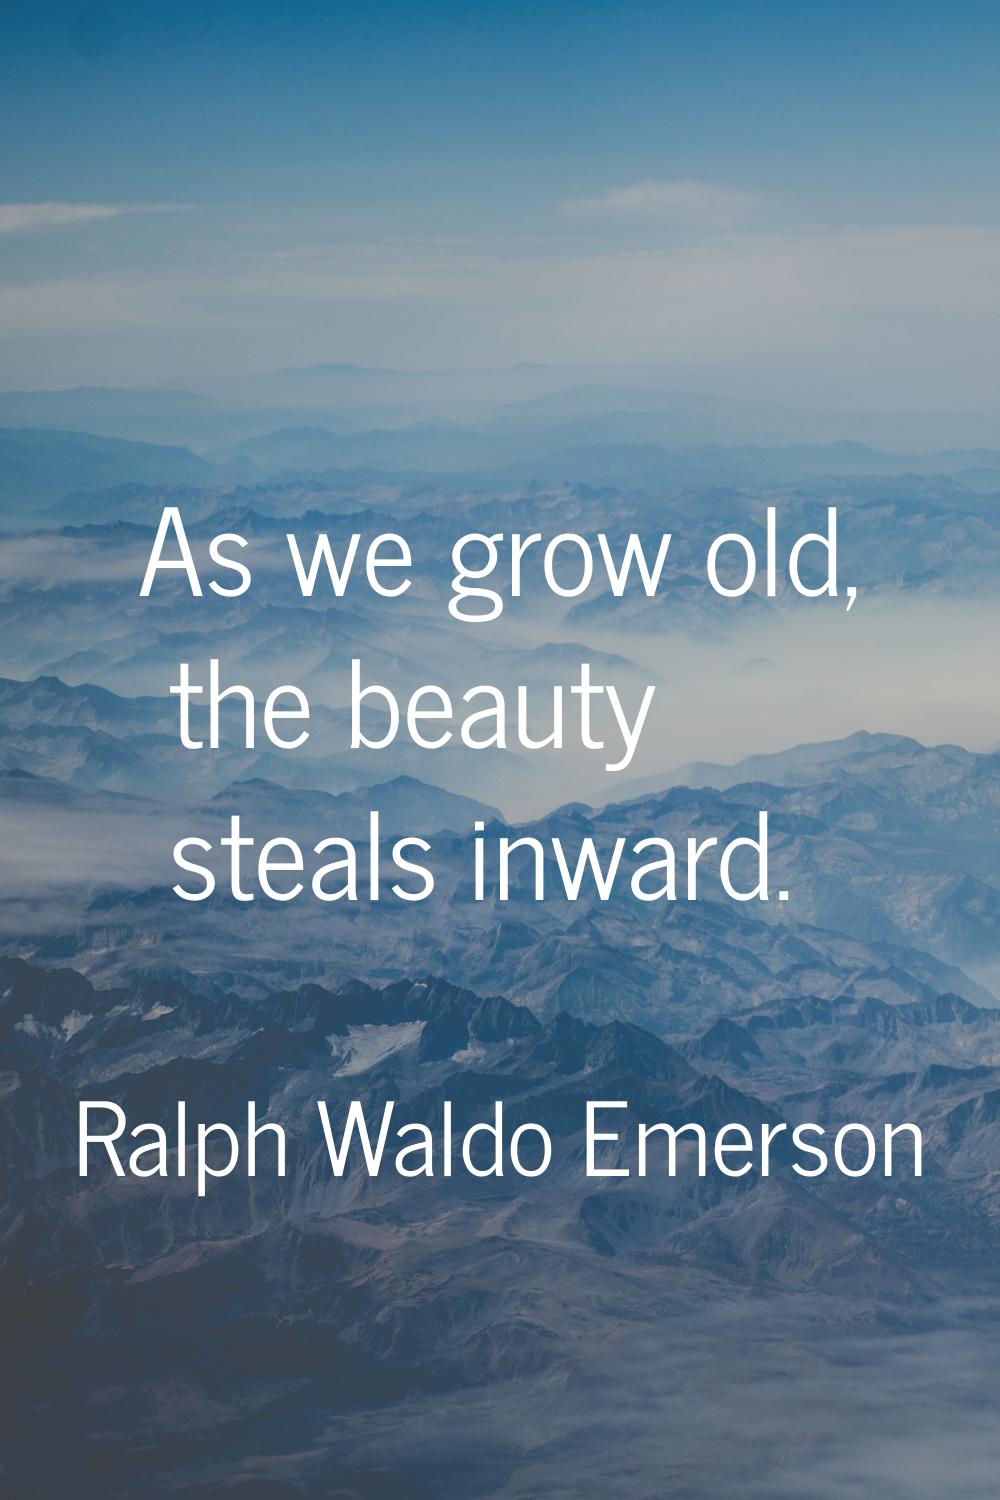 As we grow old, the beauty steals inward.